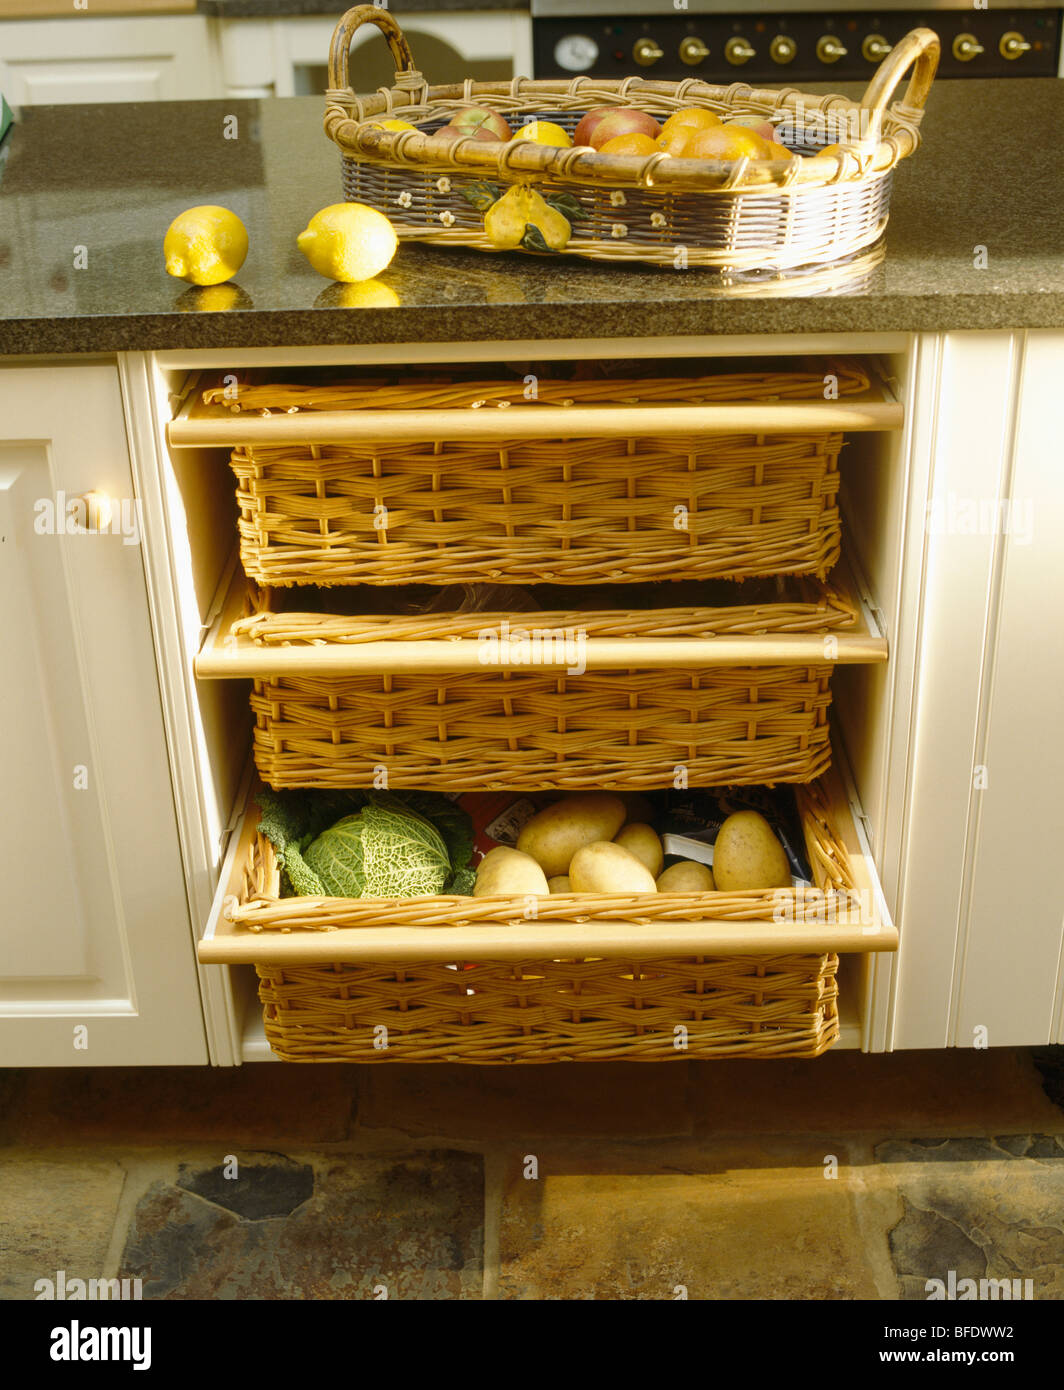 https://c8.alamy.com/comp/BFDWW2/close-up-of-kitchen-storage-baskets-in-cream-fitted-unit-with-basket-BFDWW2.jpg